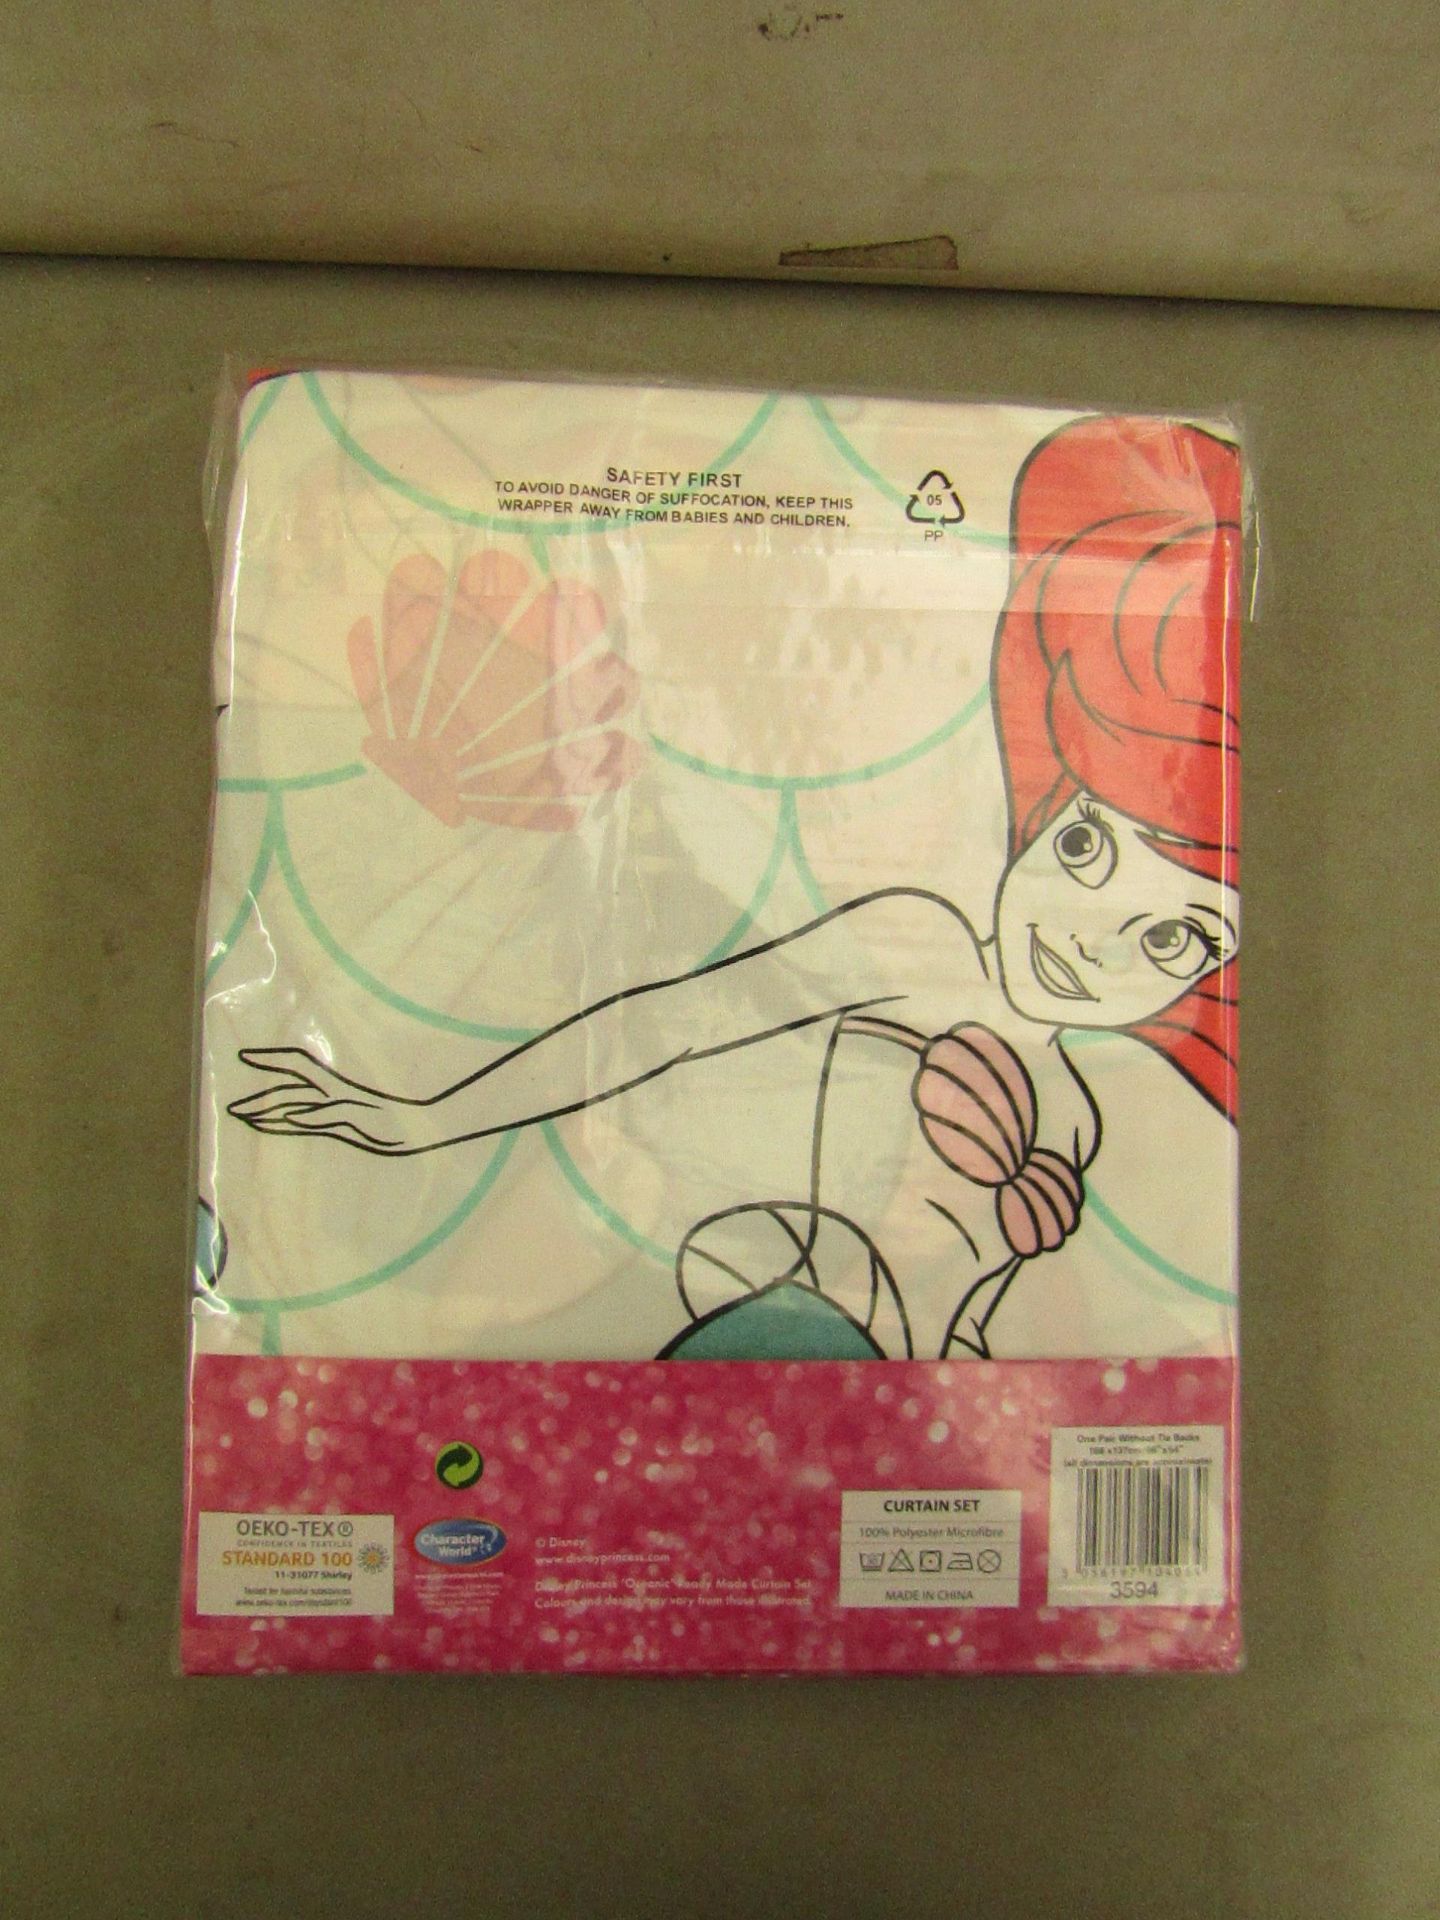 1 x Disney Princess Curtain Set 66" x 54" with Tie Backs new & packaged